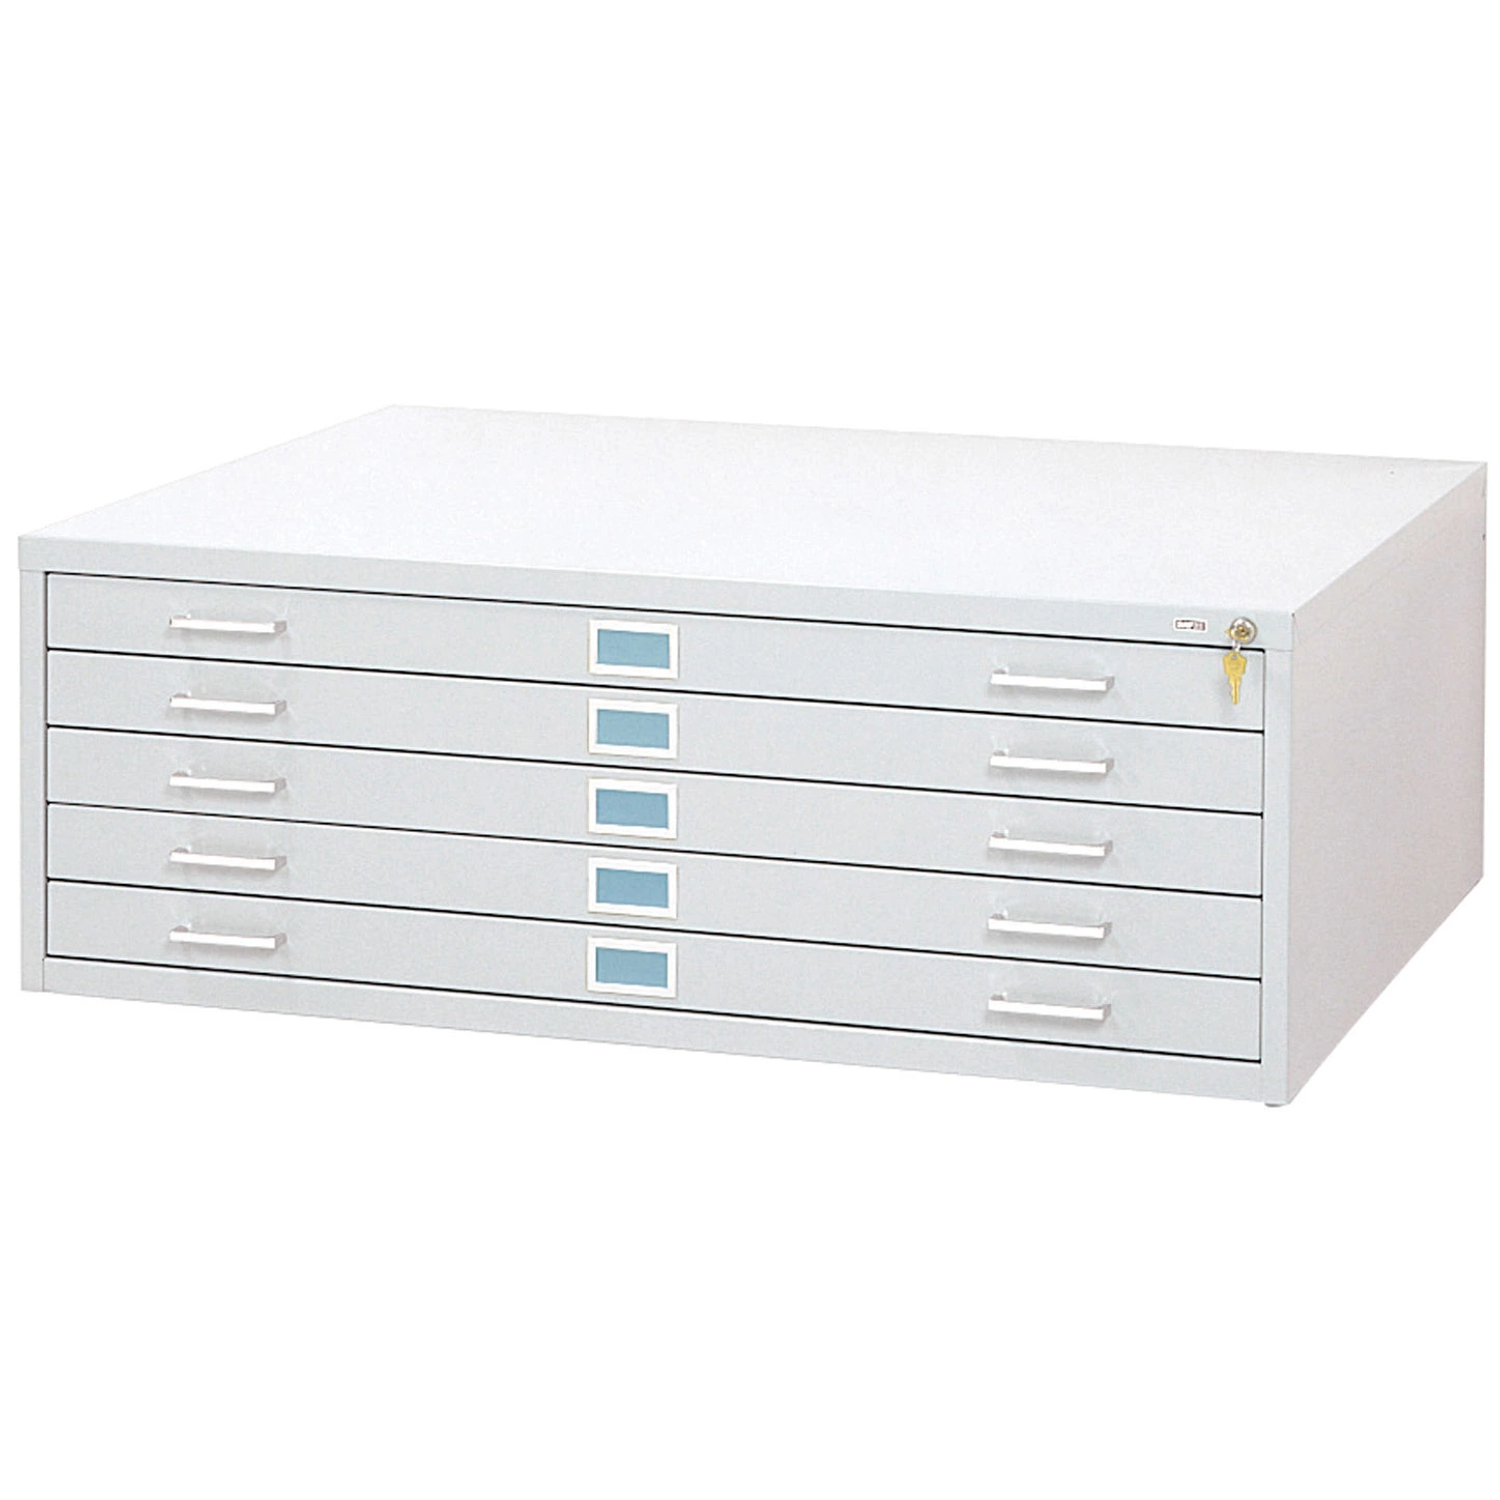 Safco® Horizontal 5-Drawer Flat File for 36 x 48 Sheets, Flat Files, Document Preservation, Preservation